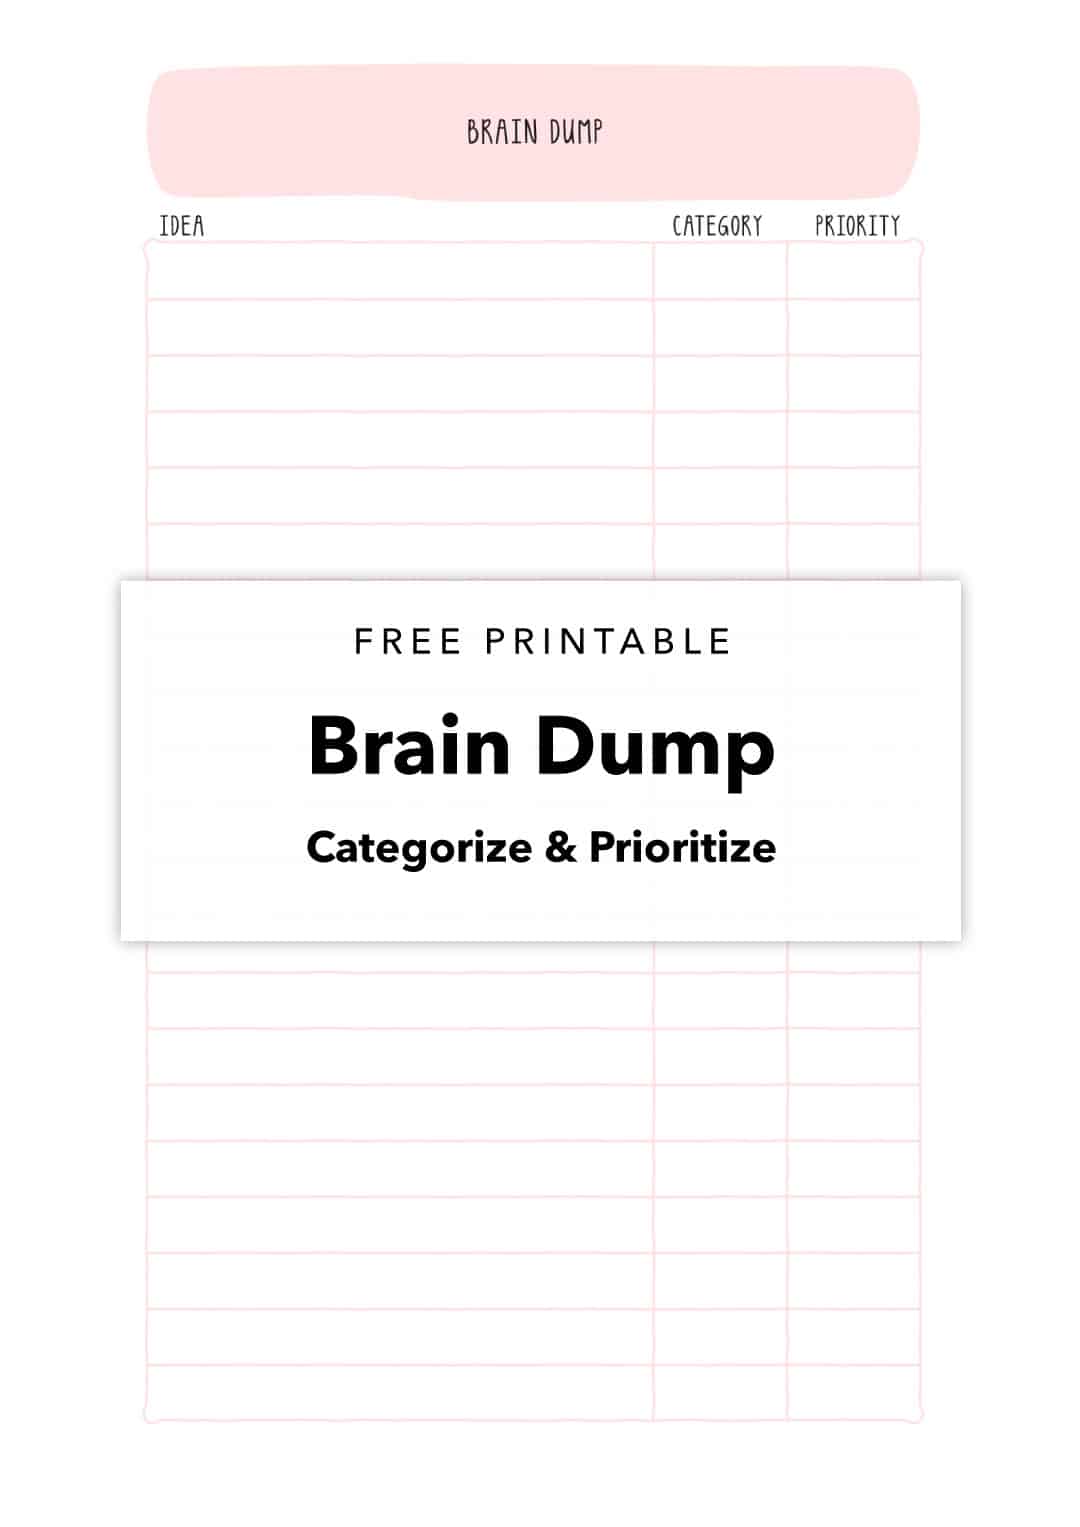 Free Printable - Brain Dump to Categorize and Prioritize